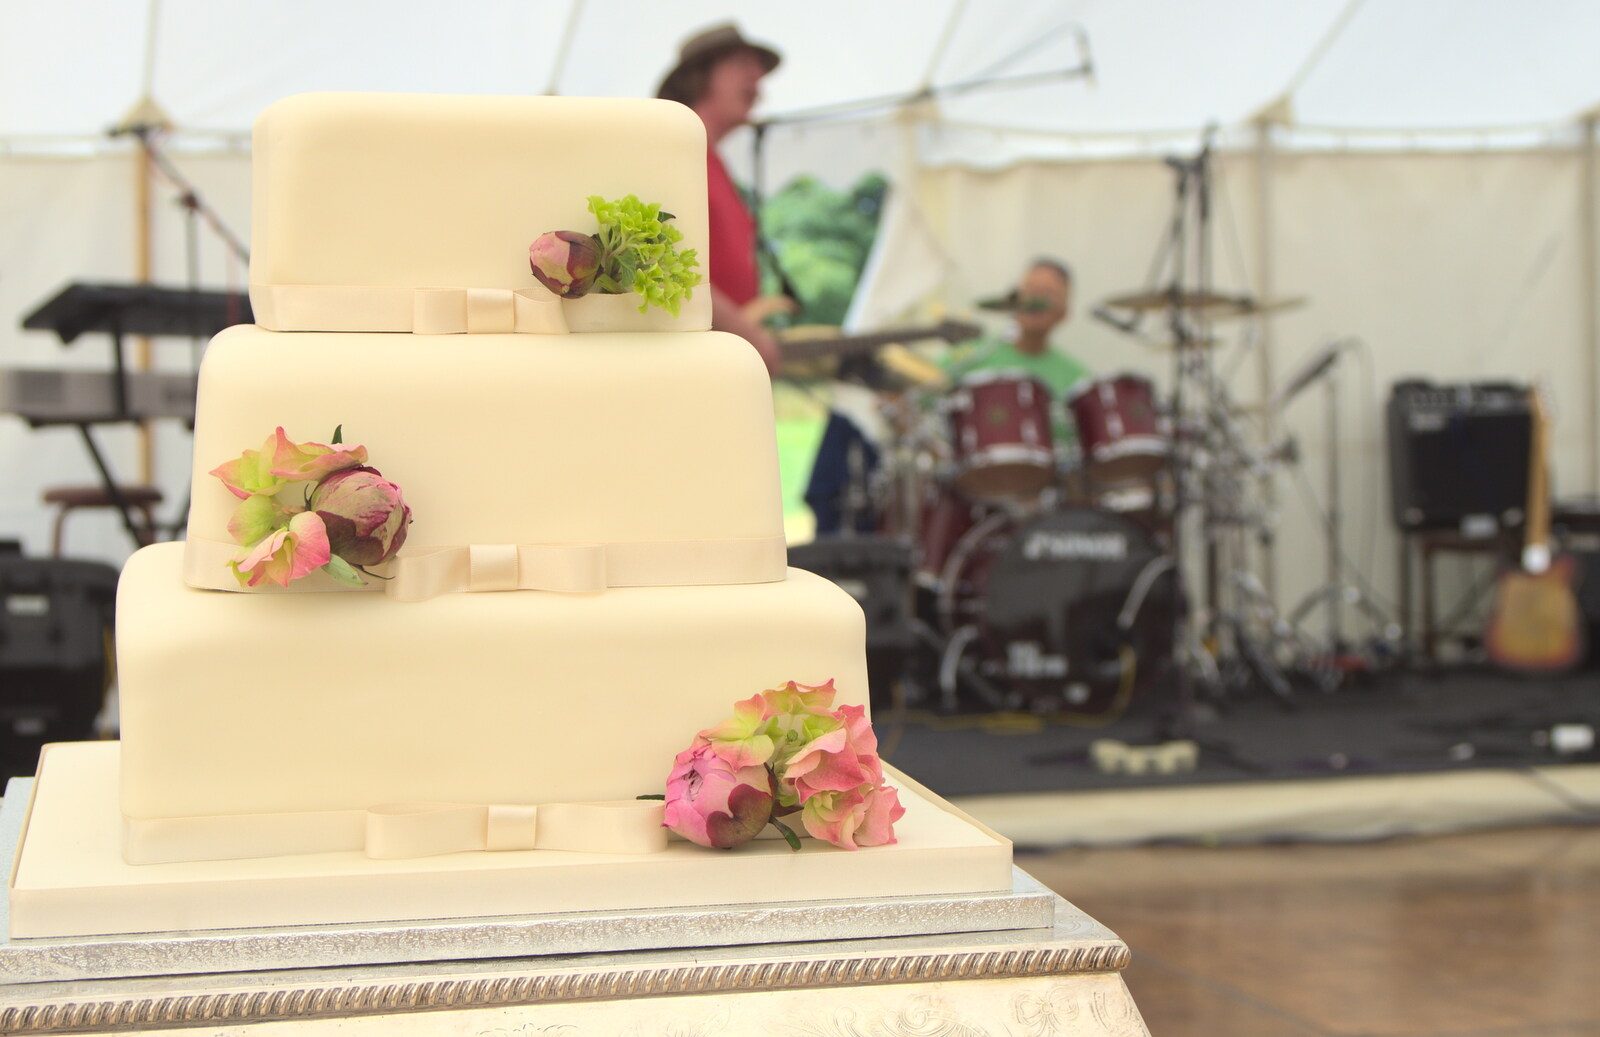 A wedding cake from The BBs Play Steph's Wedding, Burston, Norfolk - 13th July 2013